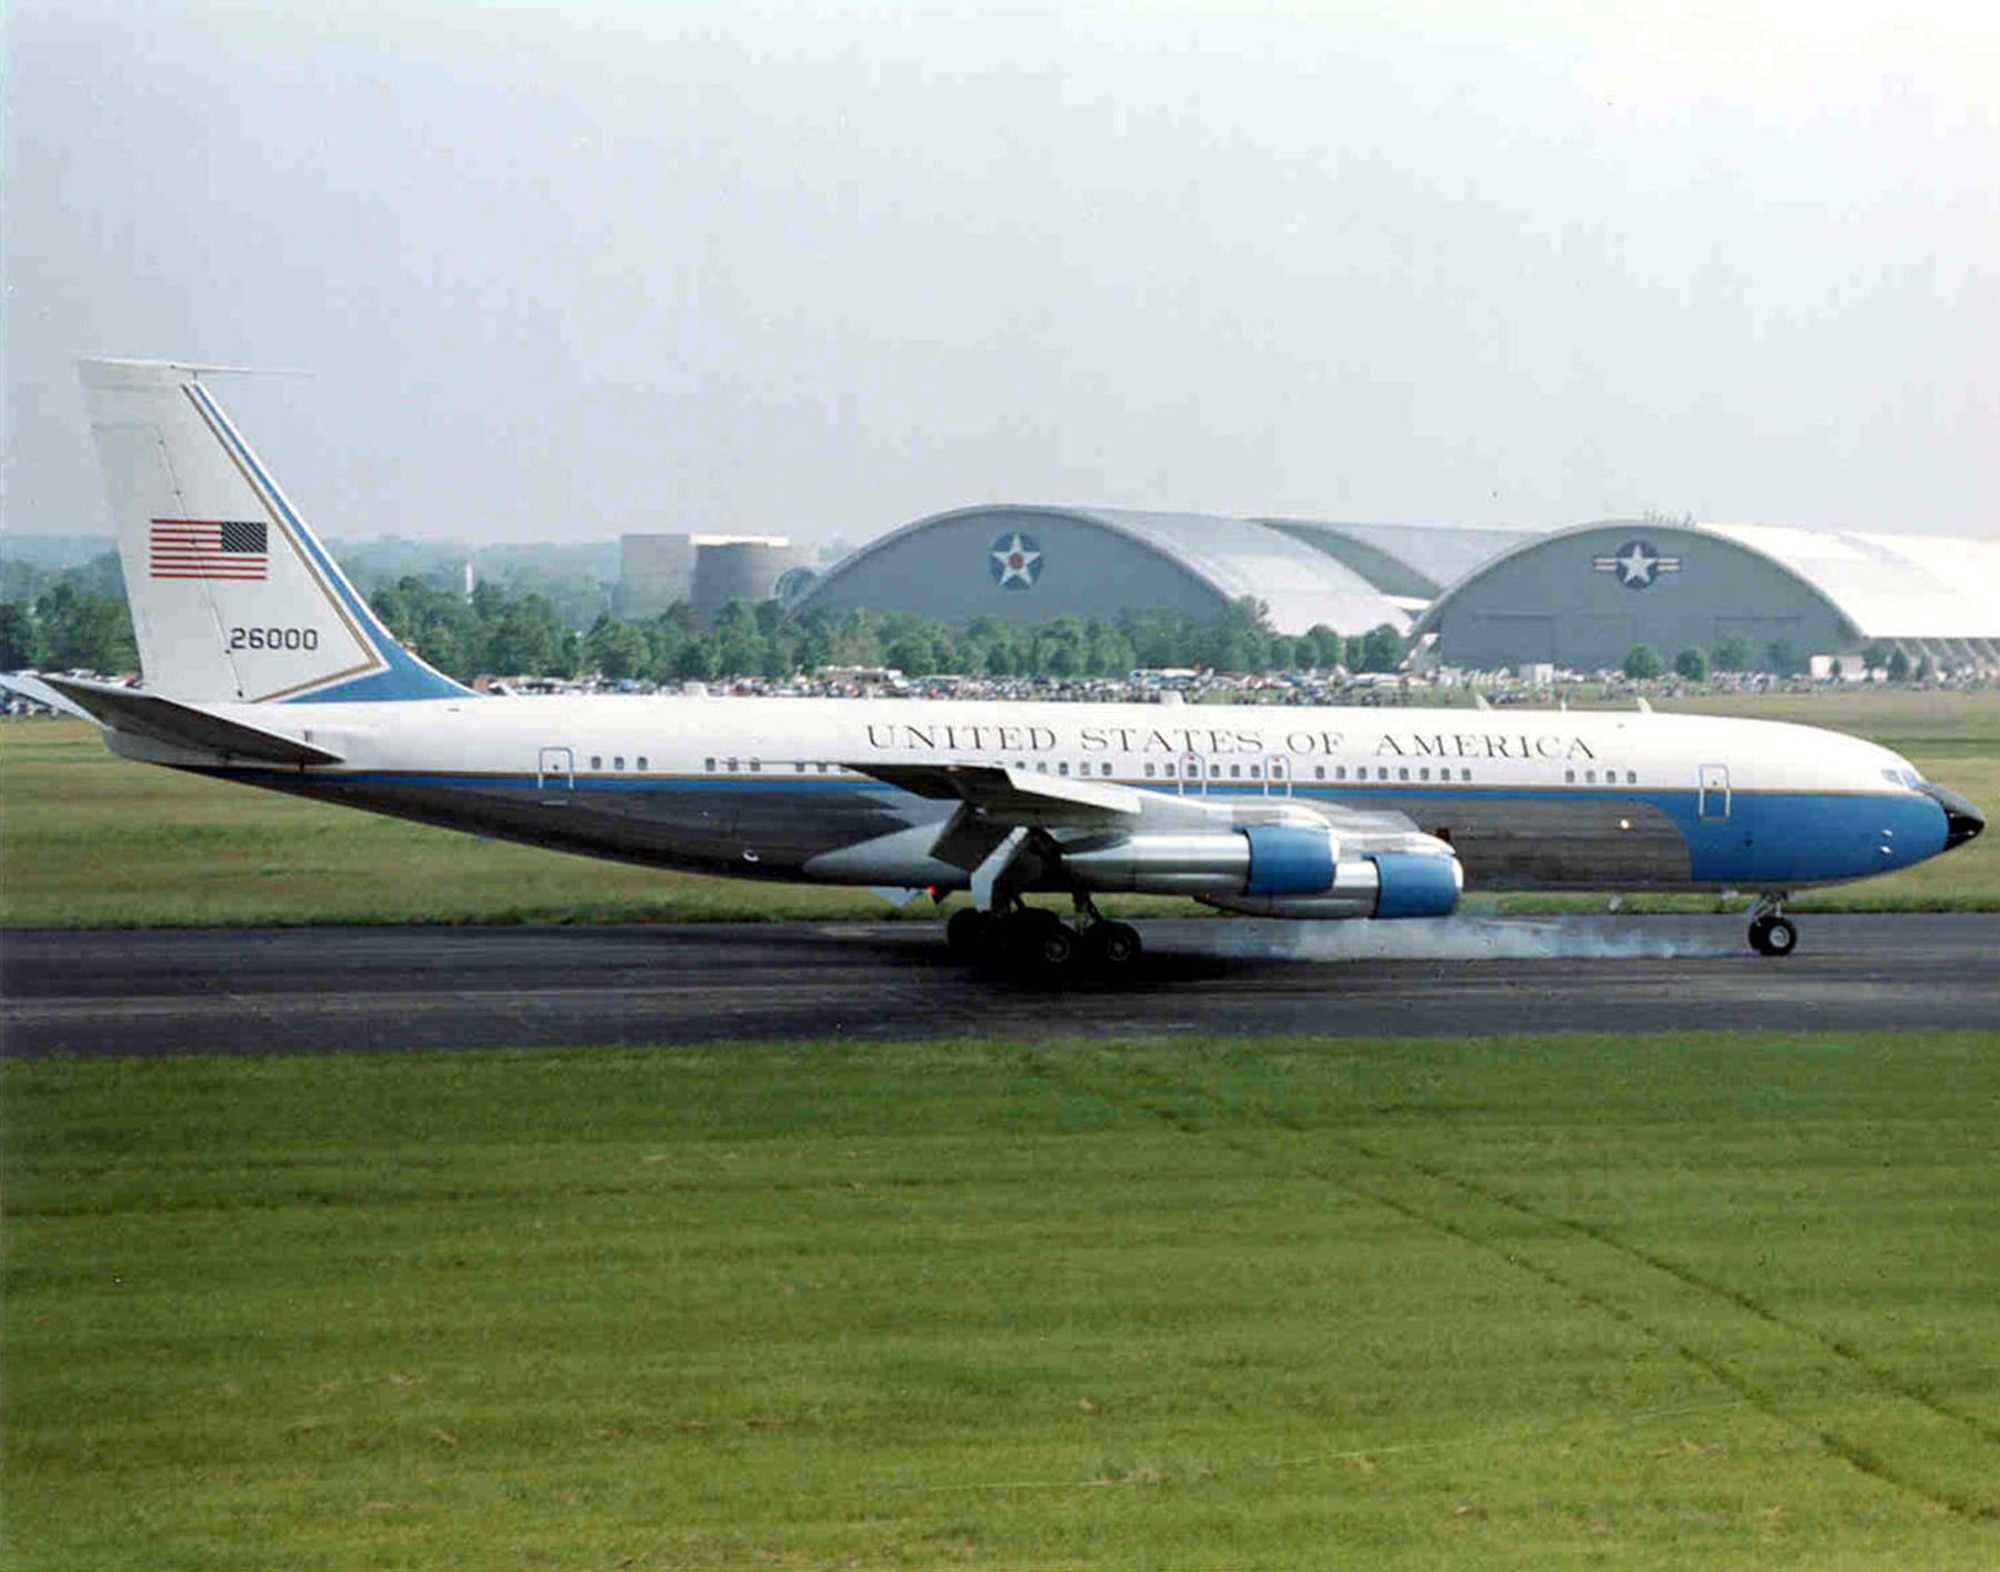 DAYTON, Ohio -- Boeing VC-137C SAM 26000 (Air Force One) at the National Museum of the United States Air Force. (U.S. Air Force photo)